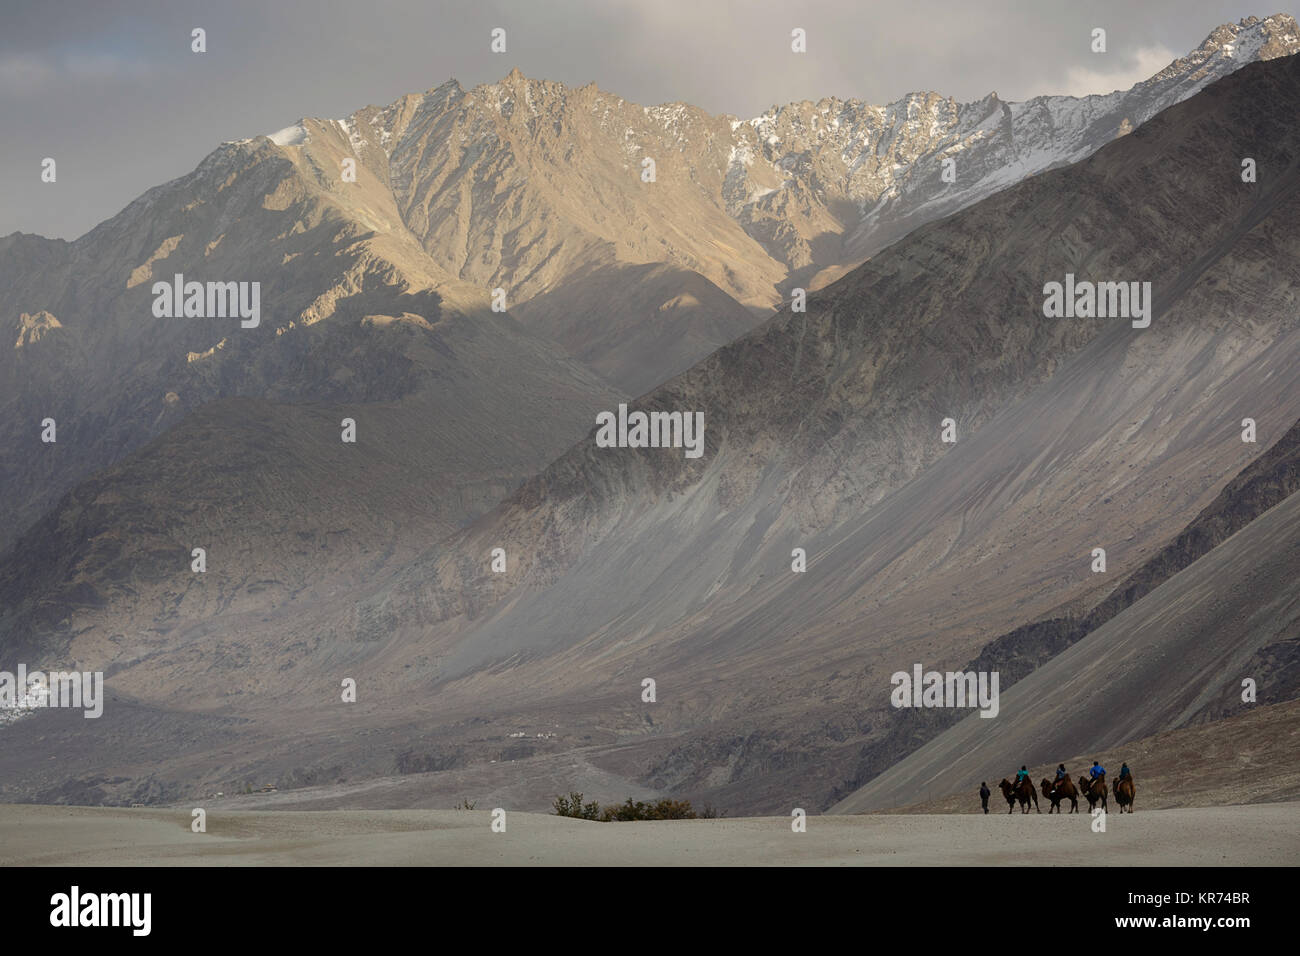 Group of Camel riders crossing the desert in the Nubra valley, Ladakh, Jammu and Kashmir, India Stock Photo